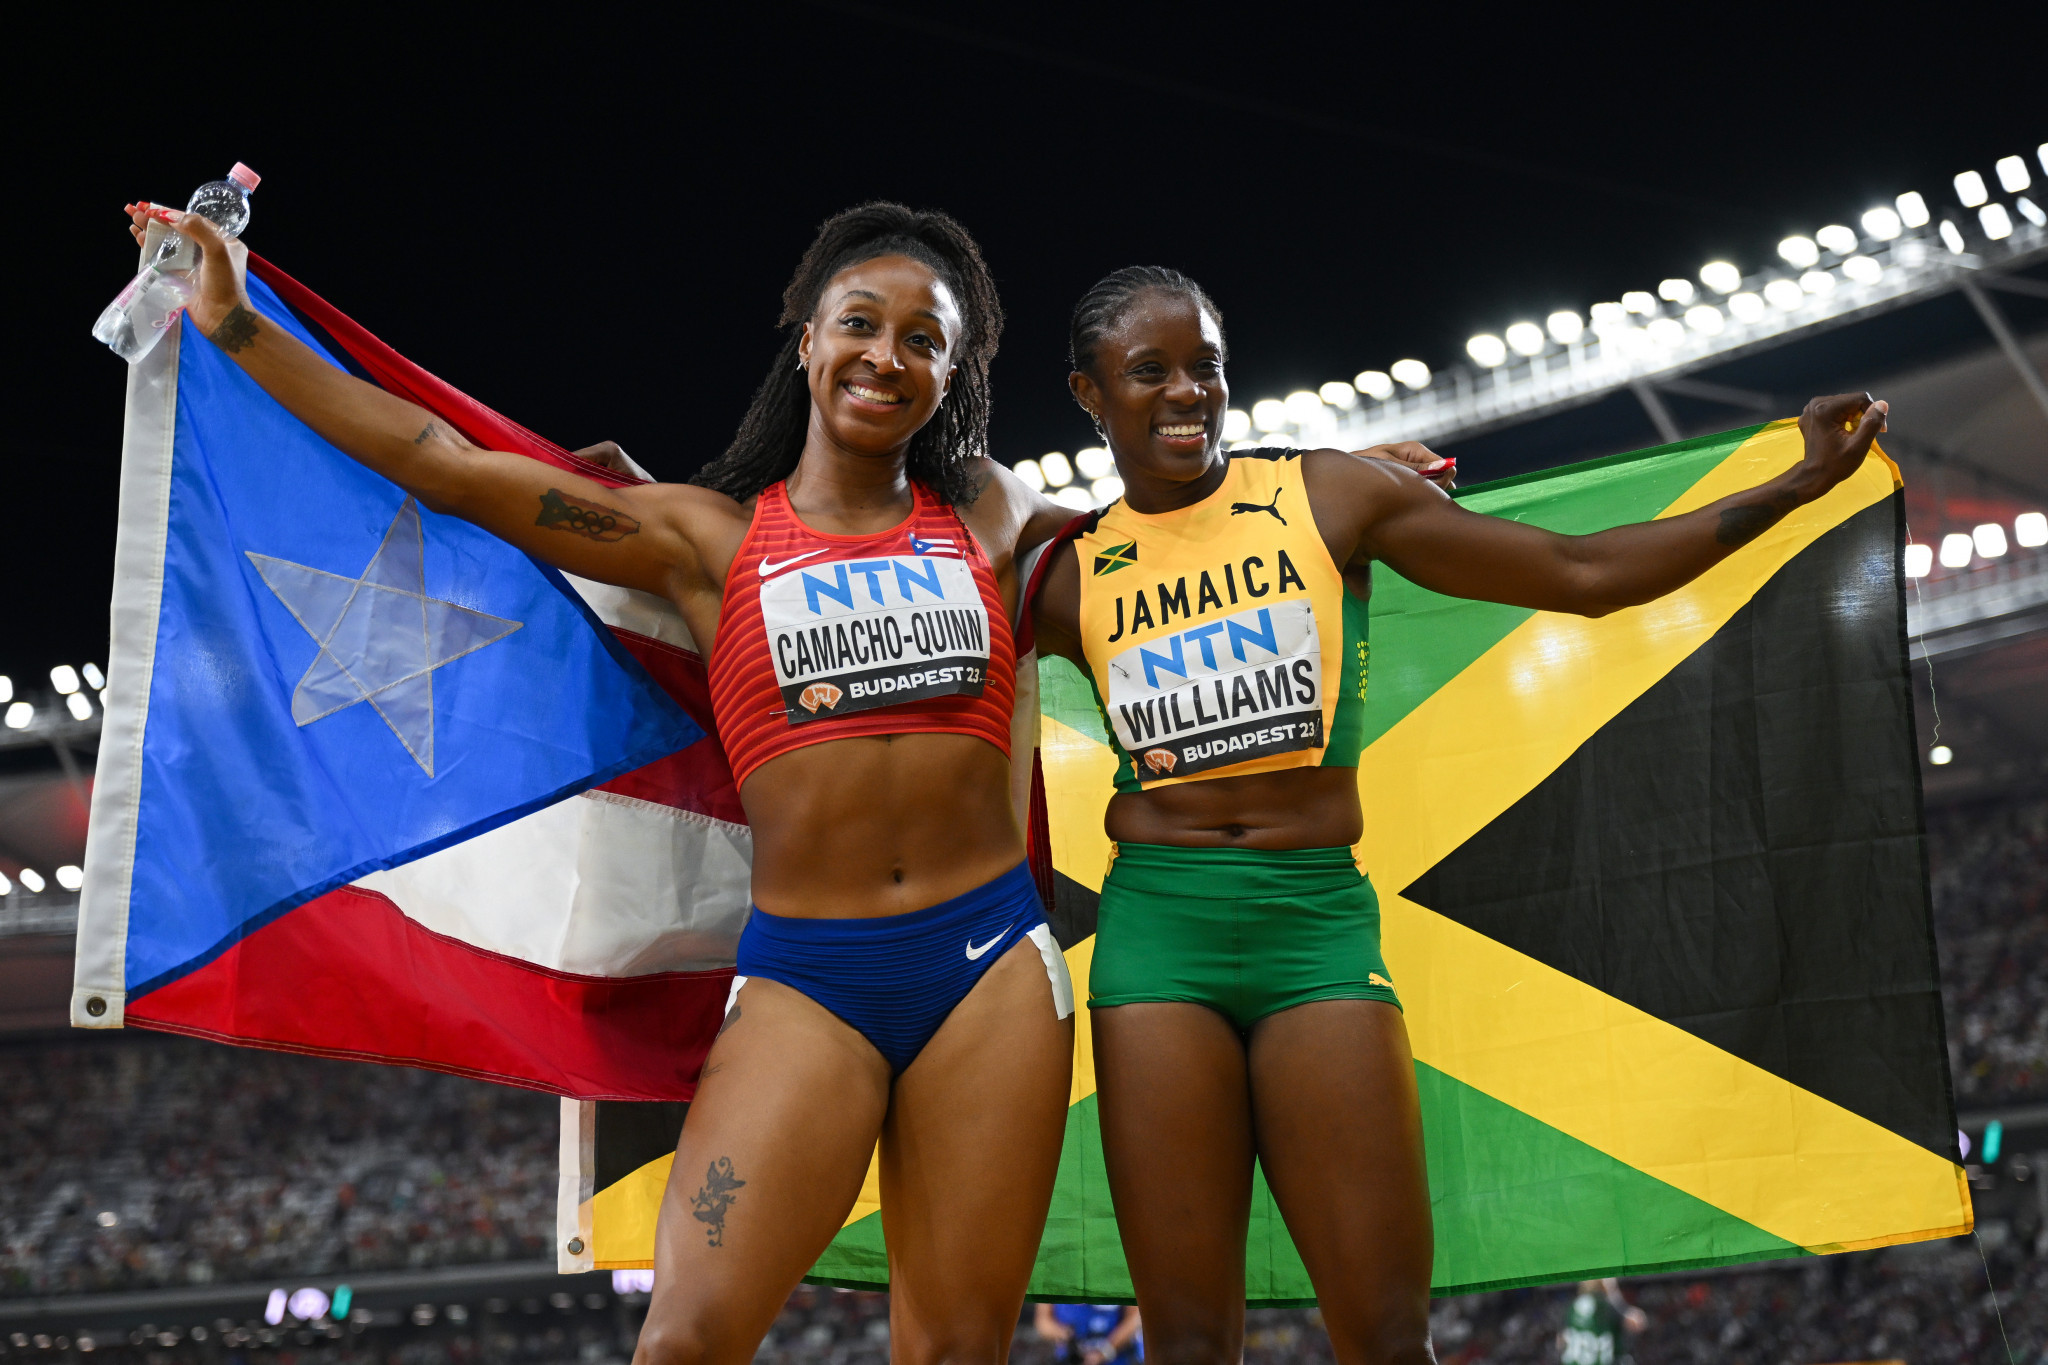 Jamaica's Danielle Williams, right, pipped Puerto Rico's Olympic champion Jasmine Camacho-Quinn to earn a surprise victory in the 100m hurdles final ©Getty Images